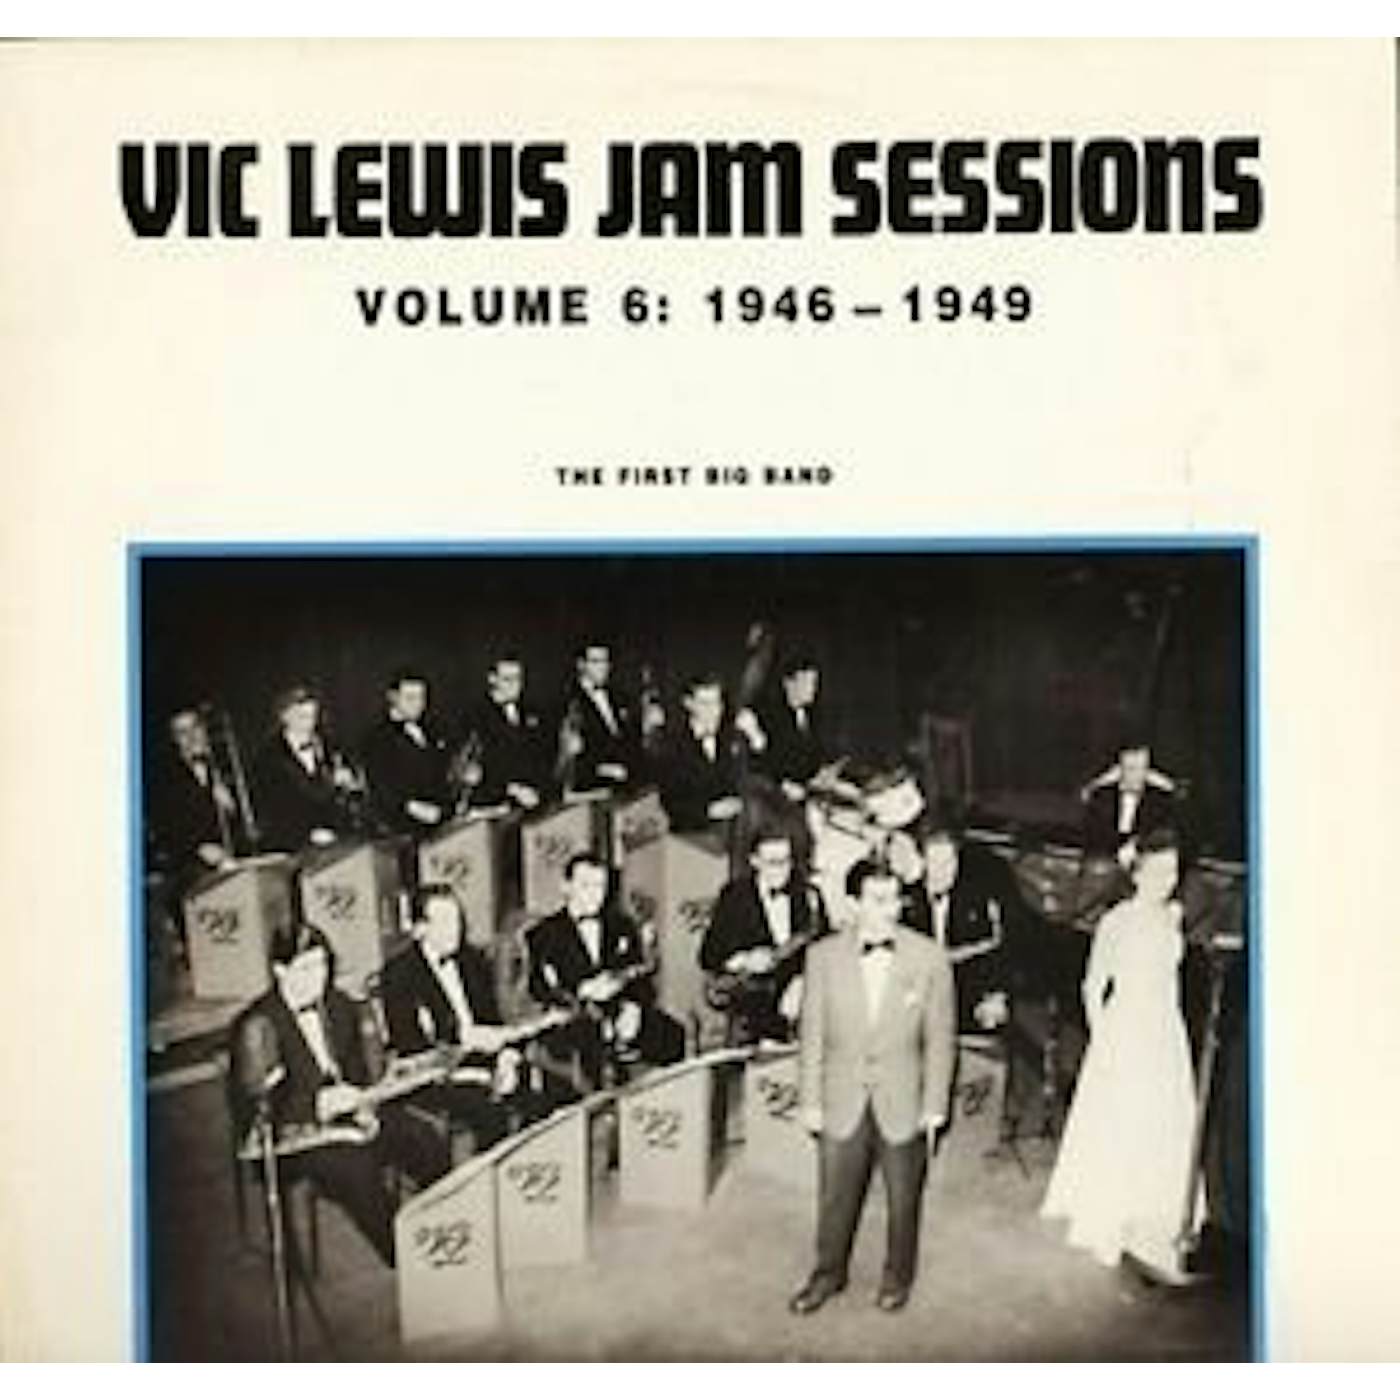 Vic Lewis JAM SESSIONS VOLUME 6: 1946-1949 - FIRST BIG BAND Vinyl Record